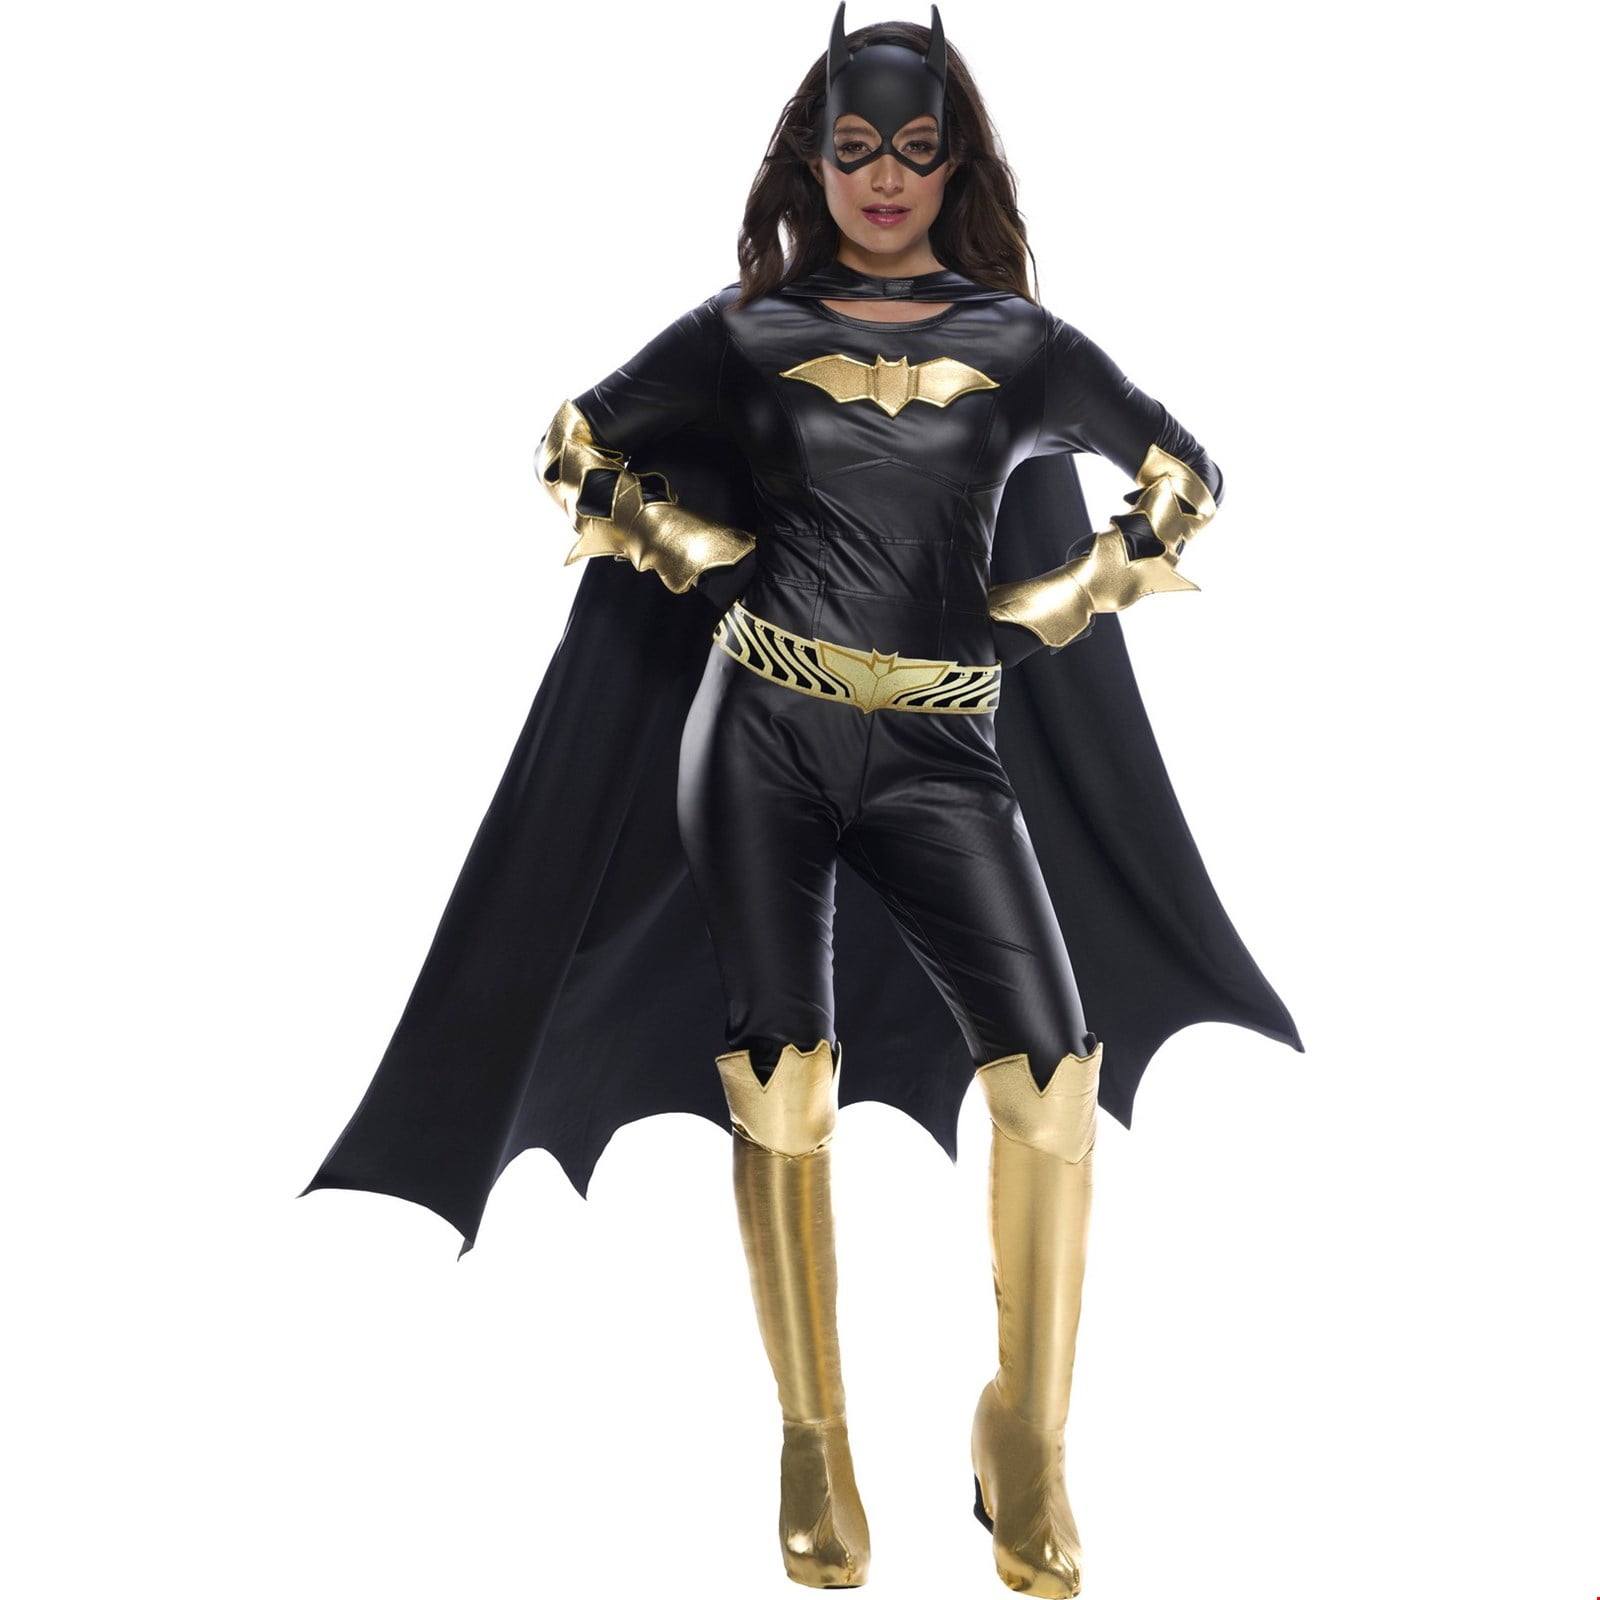 Superhero Bat Girl Cosplay Costume Halloween Jumpsuit outfit All Sizes With Mask 